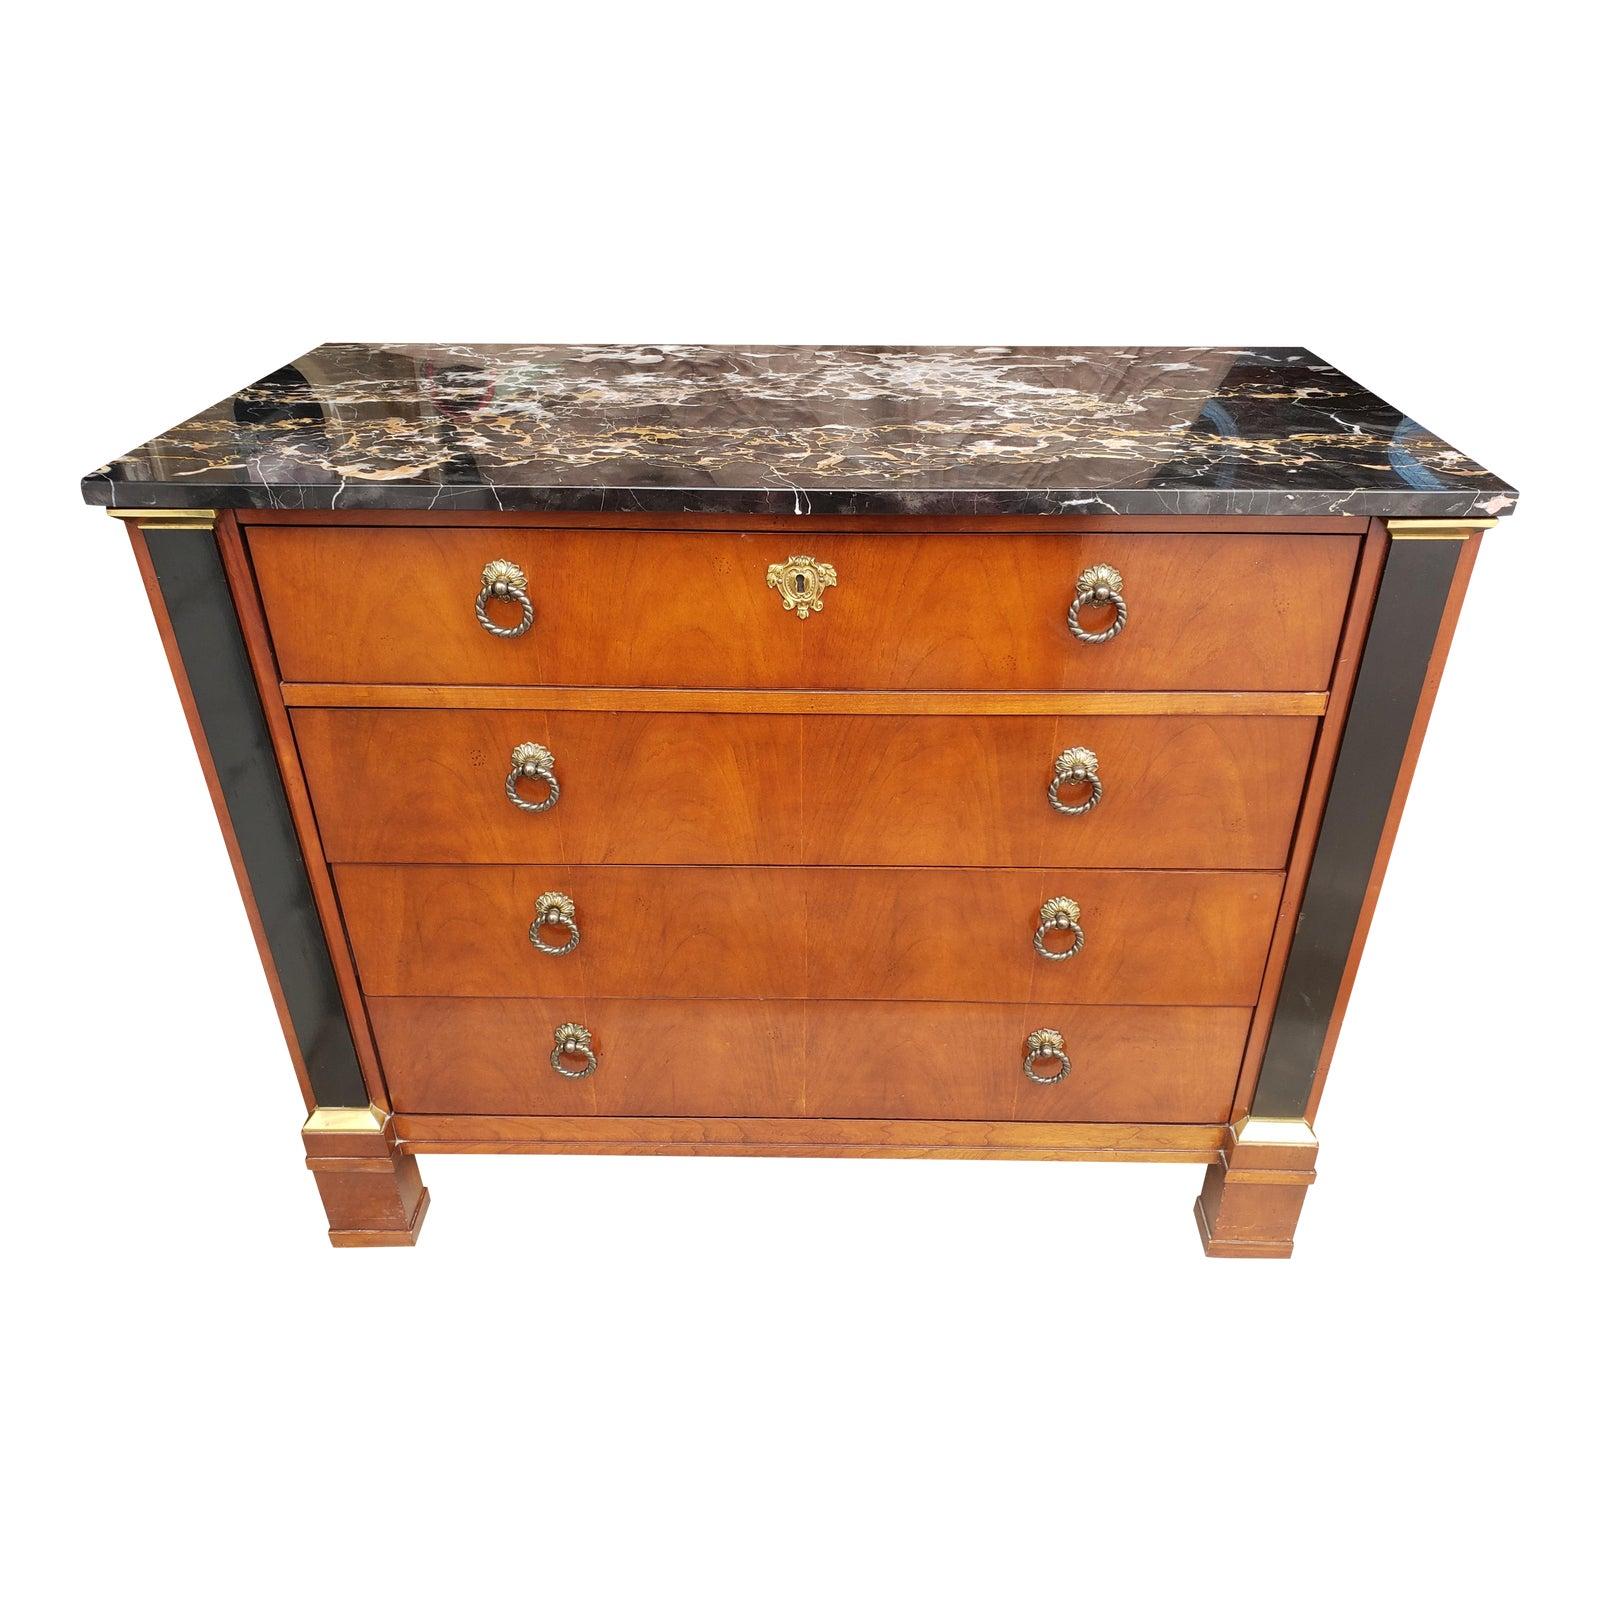 Baker Furniture Neoclassical Regency Mahogany Marble Top Commode